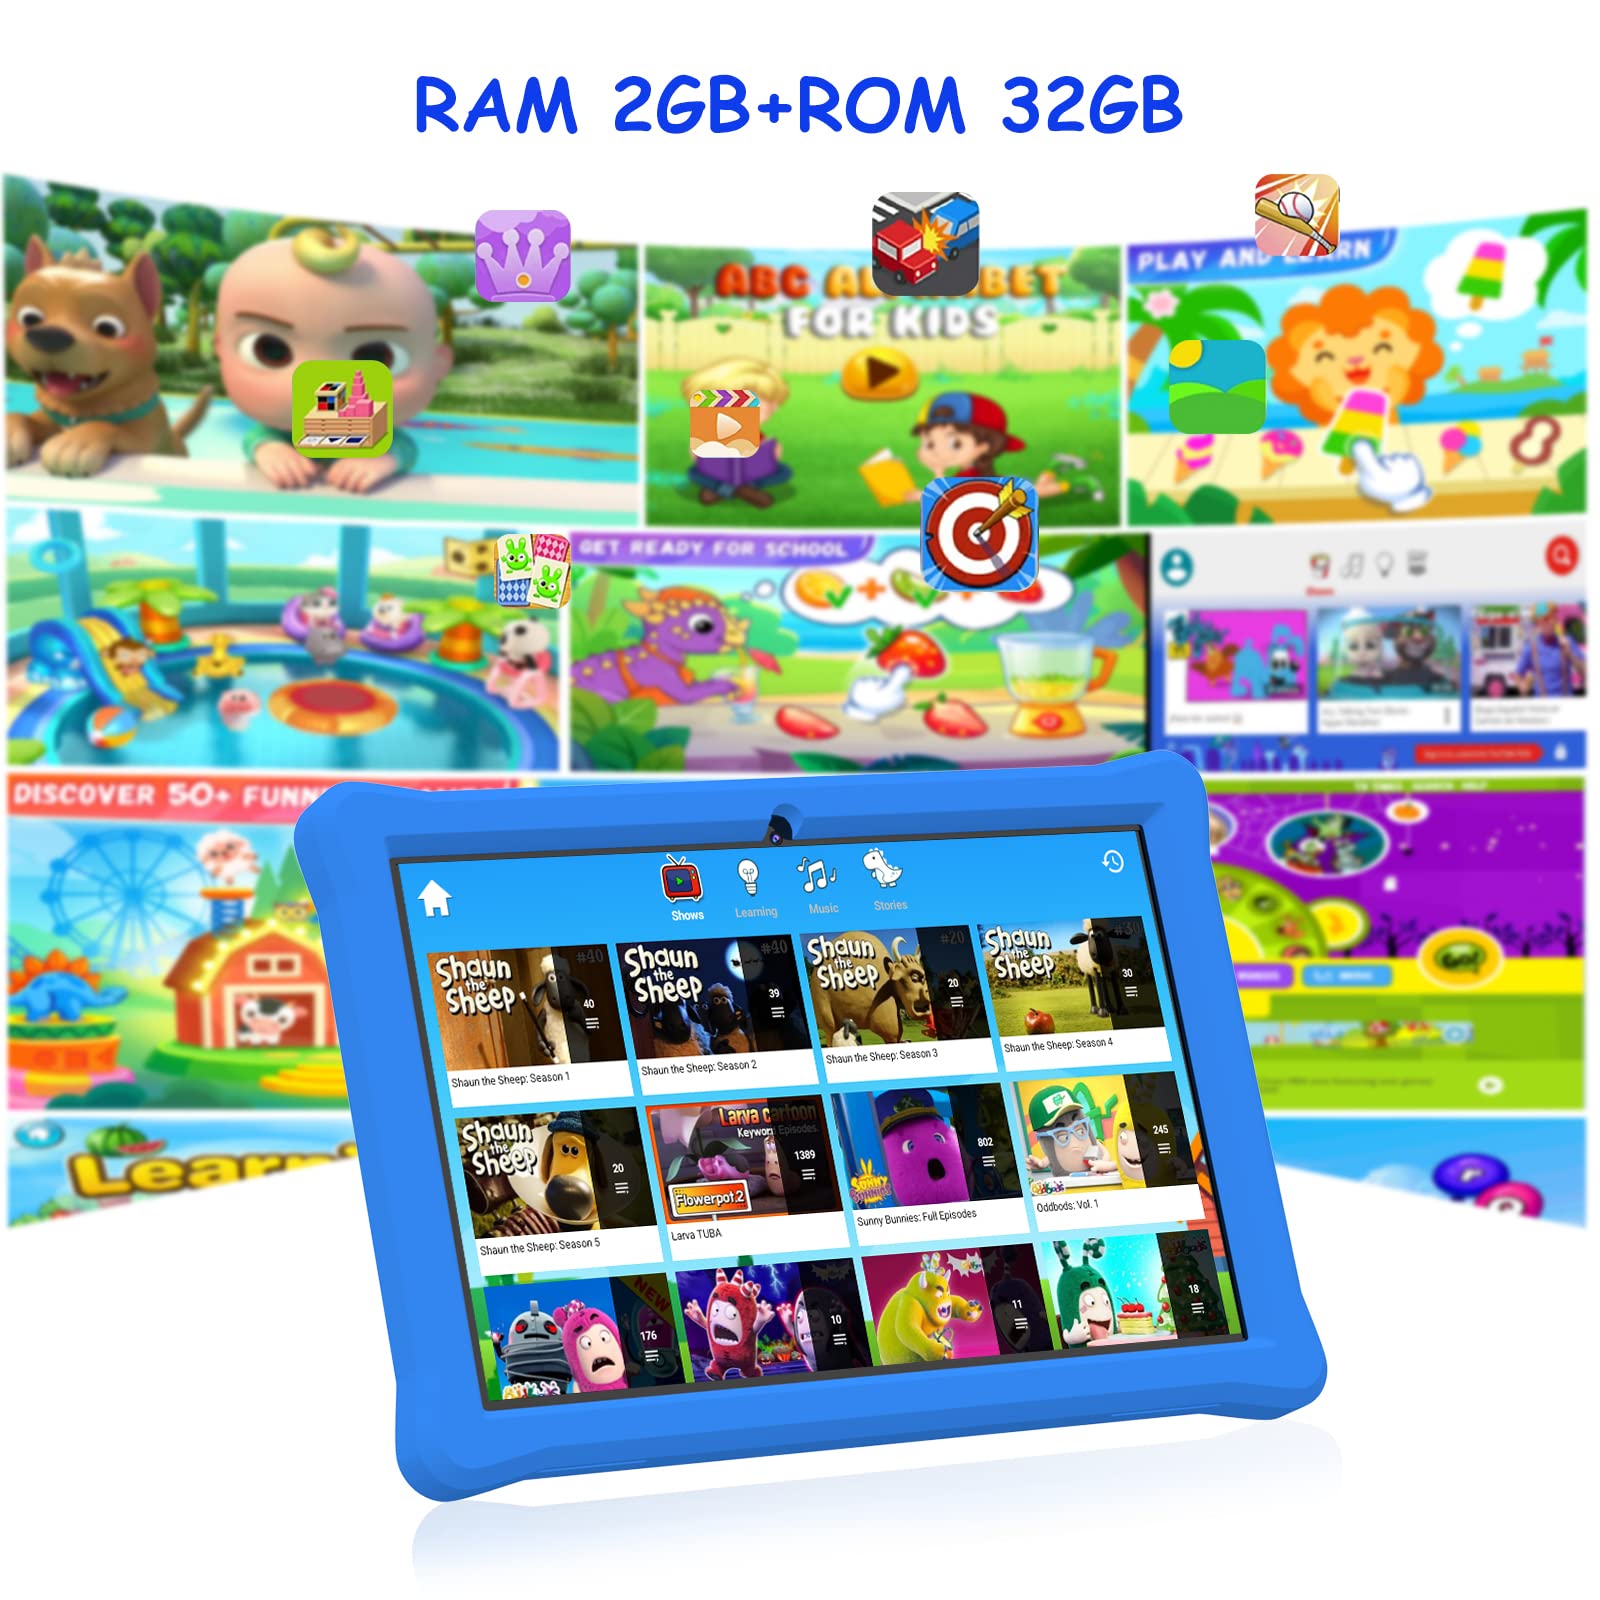 ZZB Kids Tablet 10 Inch Toddler Tablet, Android 11 Tablet for Boys Girls, 32GB Storage 2GB RAM, 6000mah Battery Quad-Core Processor Dual Camera WiFi Bluetooth, Parental Control APP, with Tablet Case.